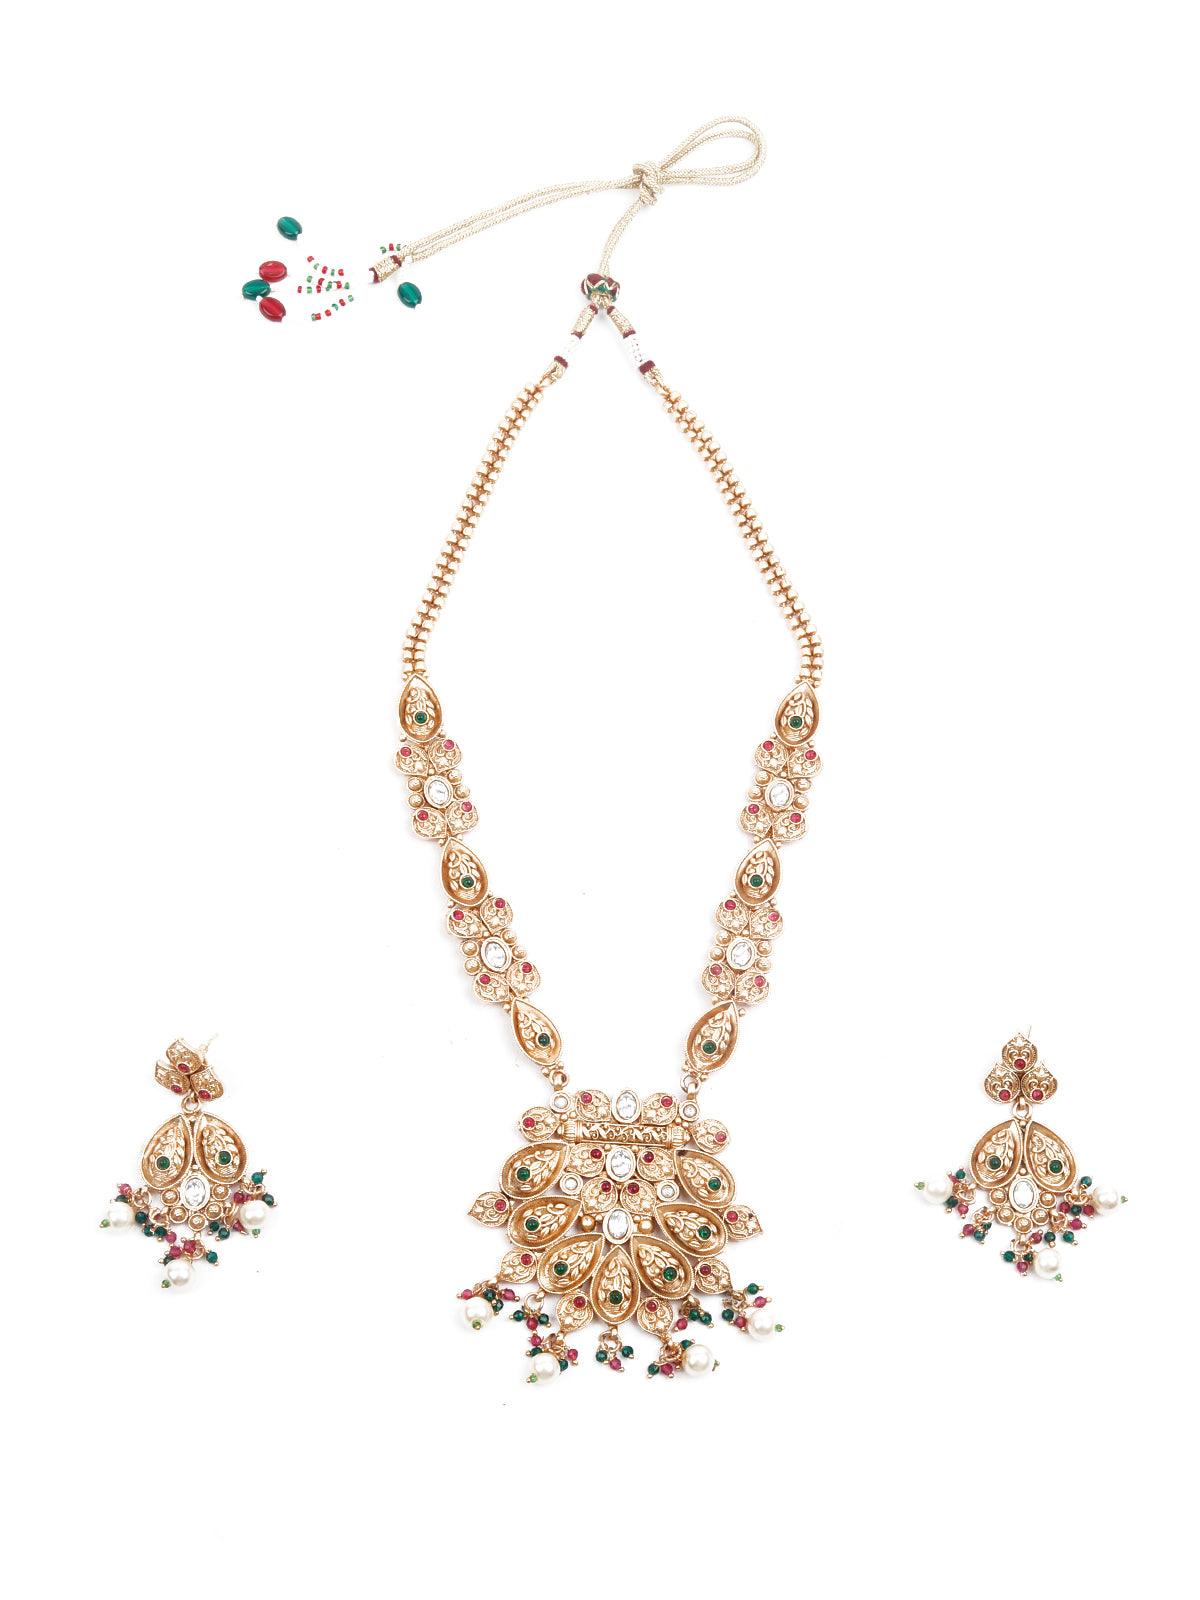 Women's Exquisitly Crafted Gold Necklace Set - Odette